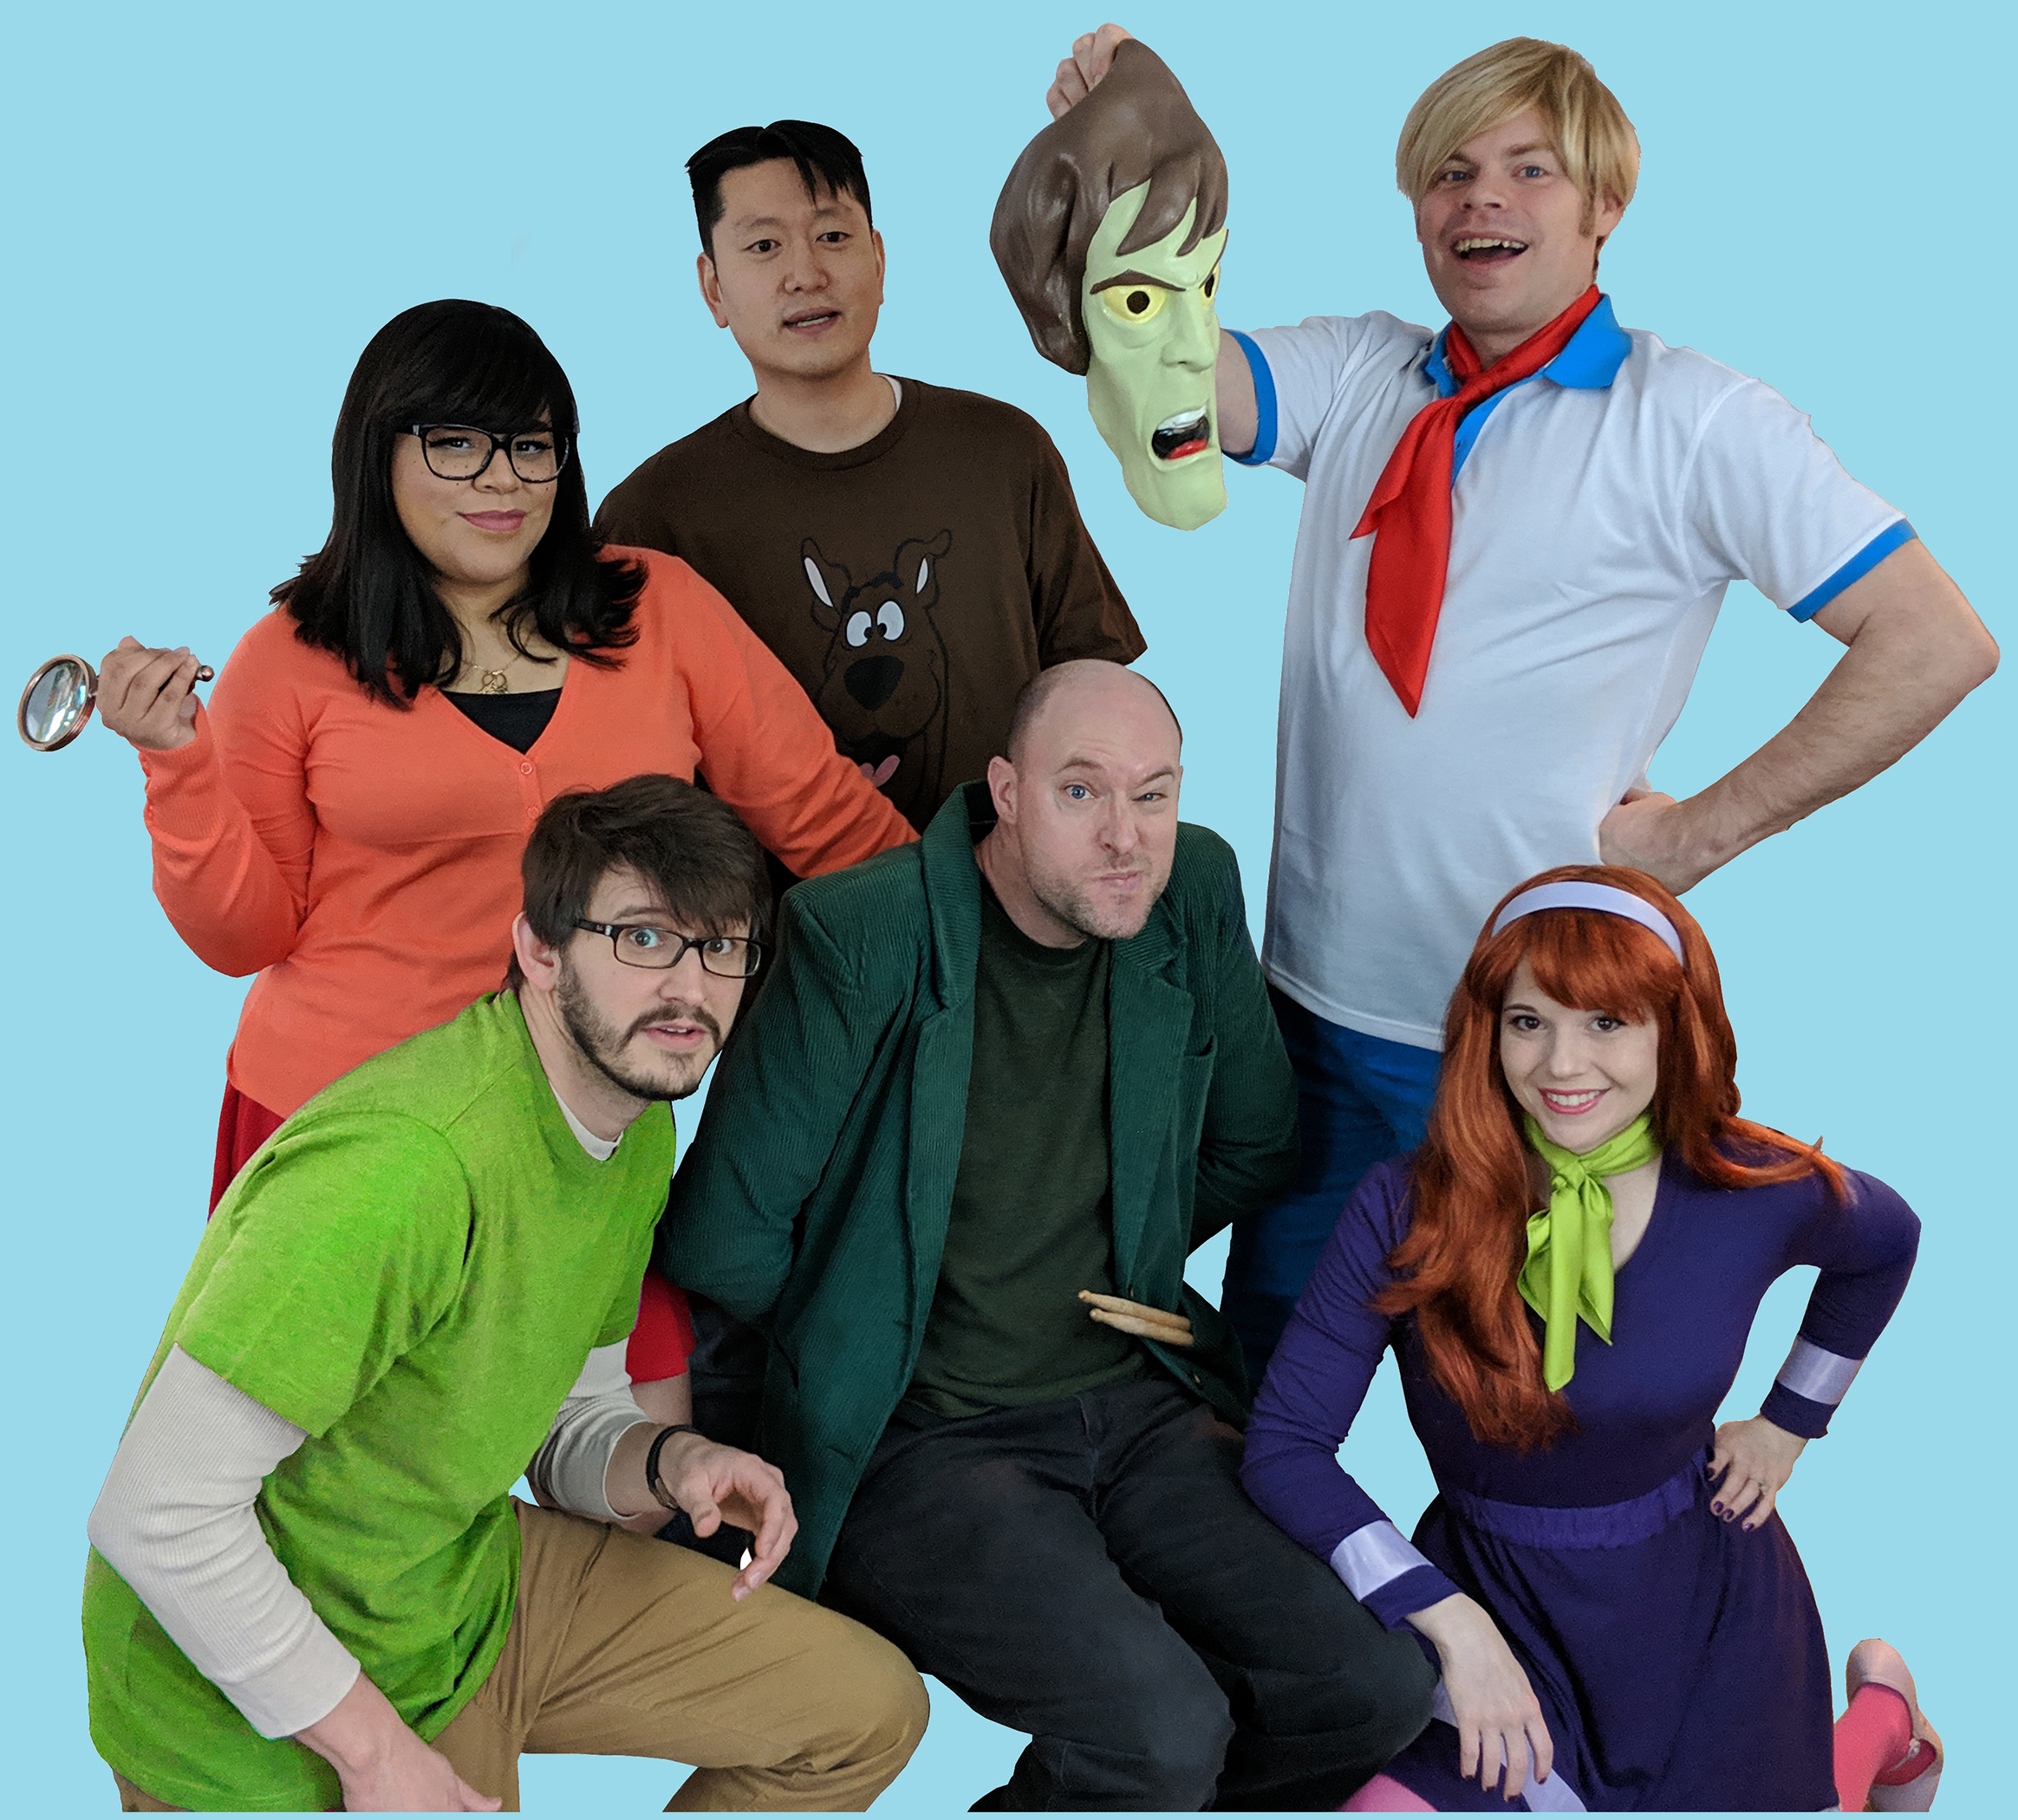 Six members of the Shake Ups dressed as Scooby Doo characters